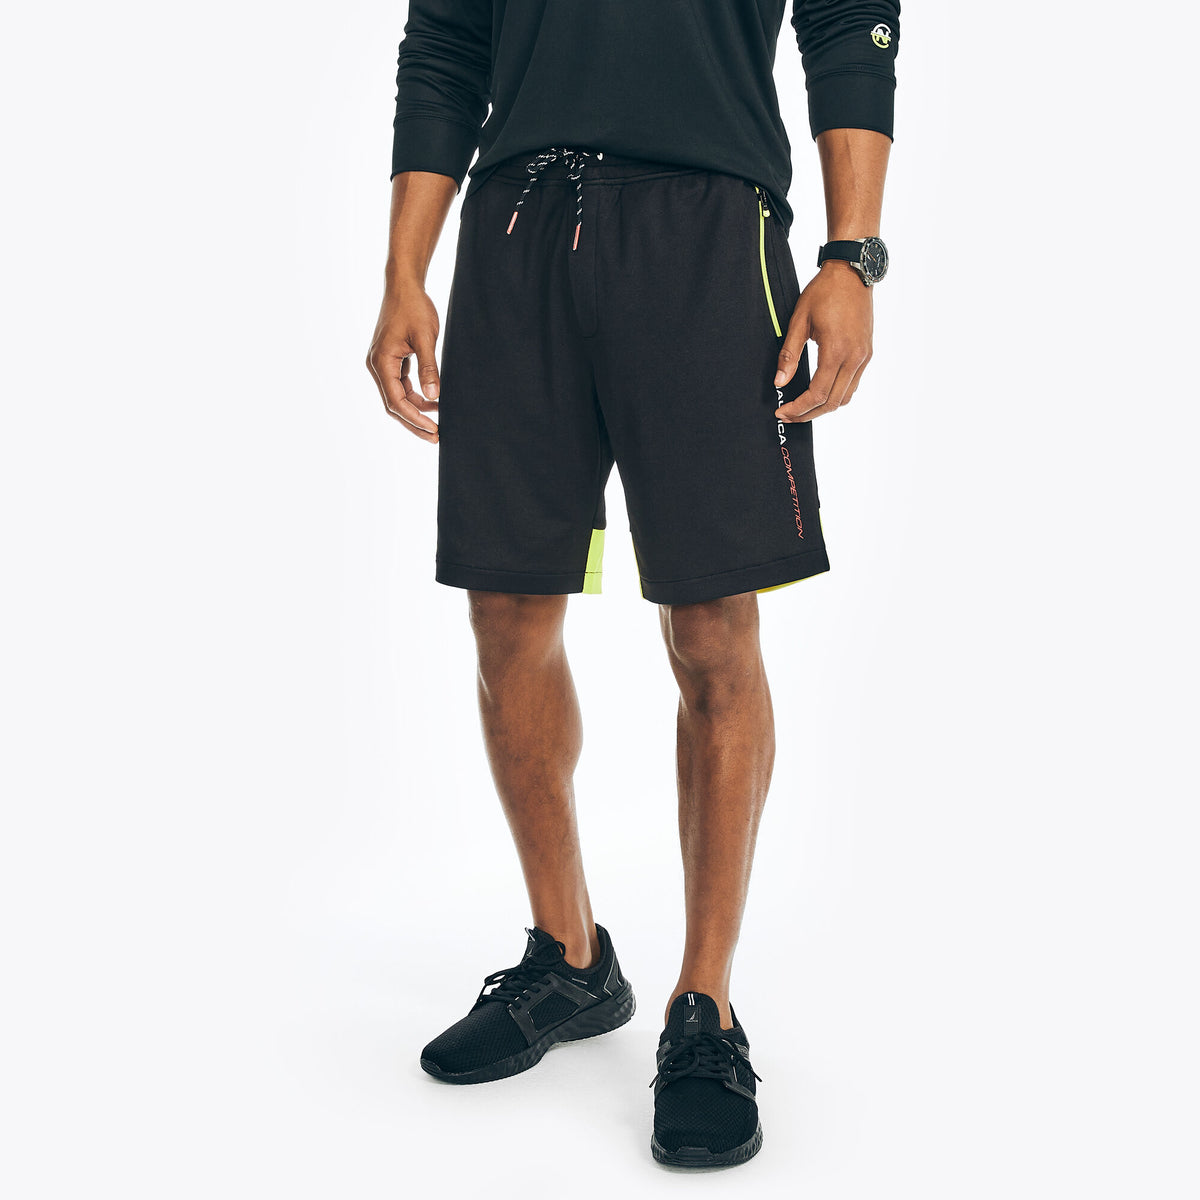 Nautica Men's Competition Sustainably Crafted 9" Colorblock Short True Black